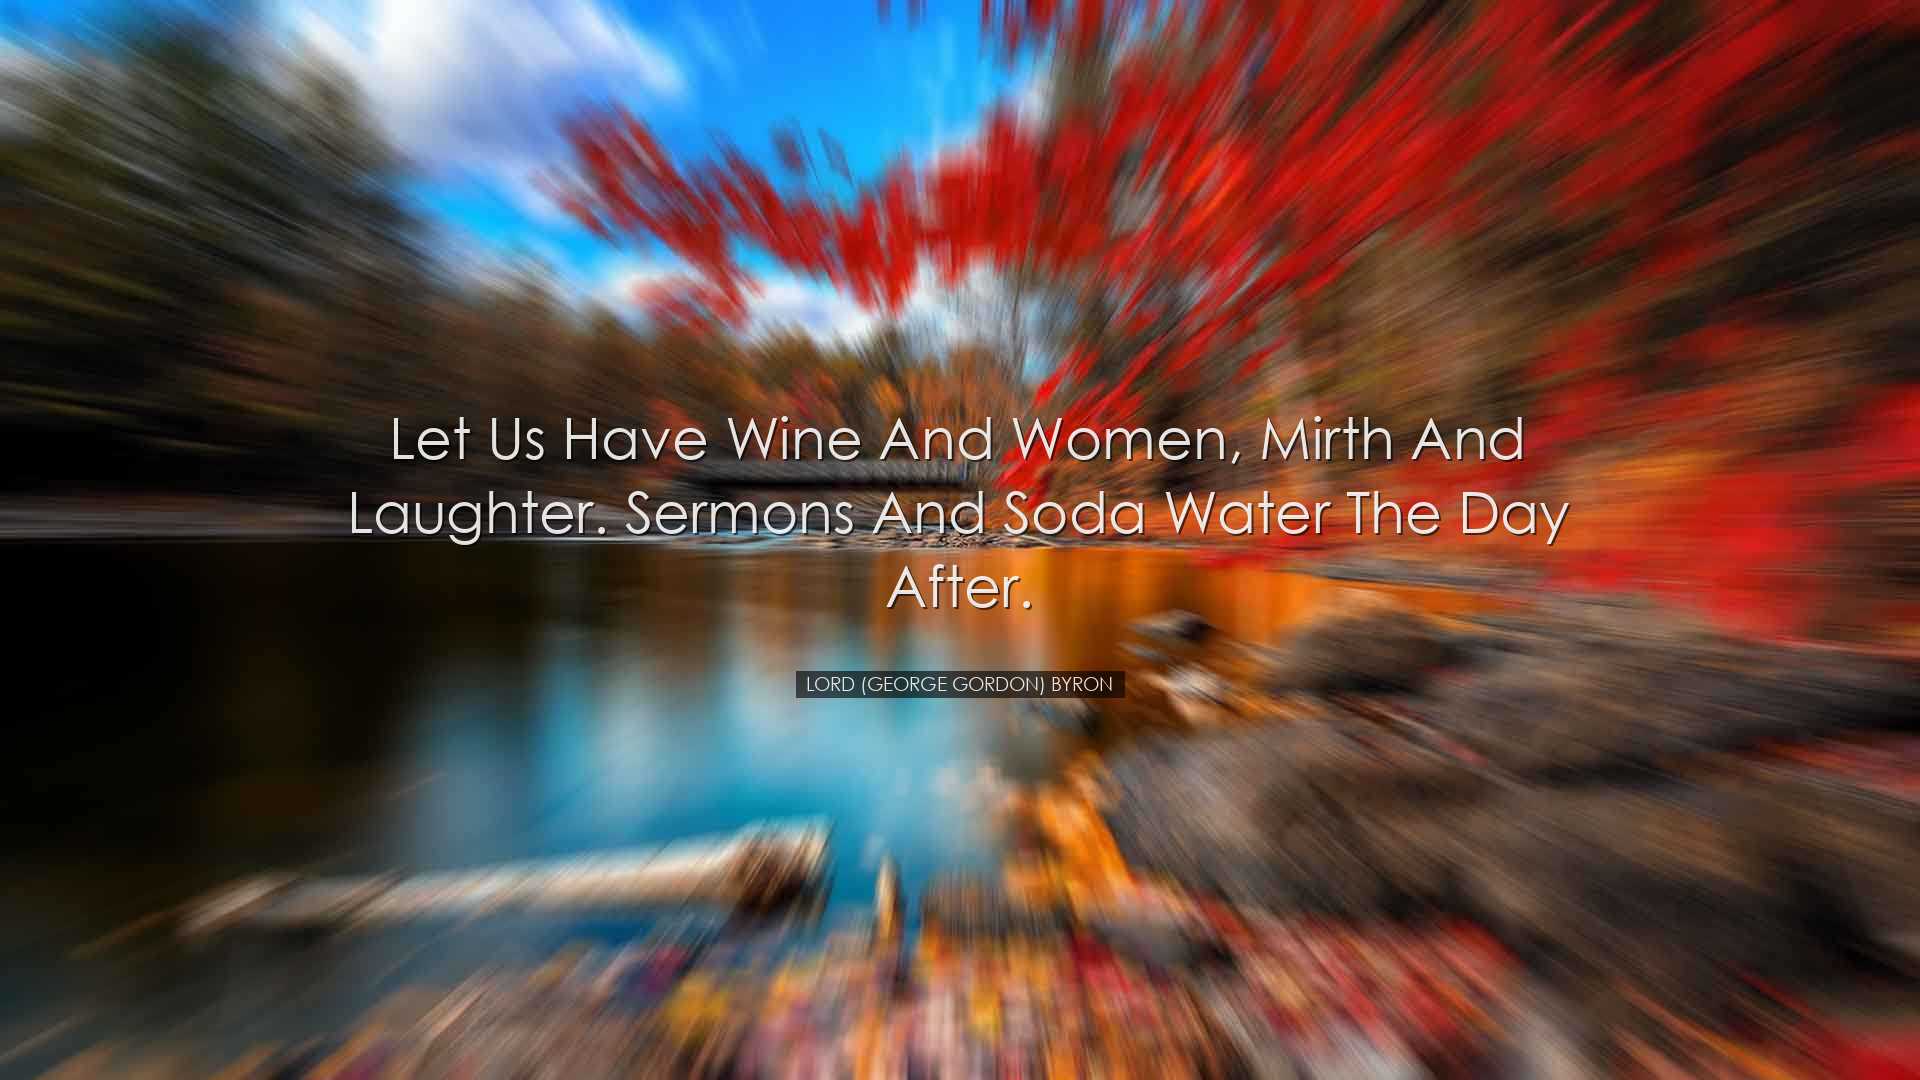 Let us have wine and women, mirth and laughter. Sermons and soda w